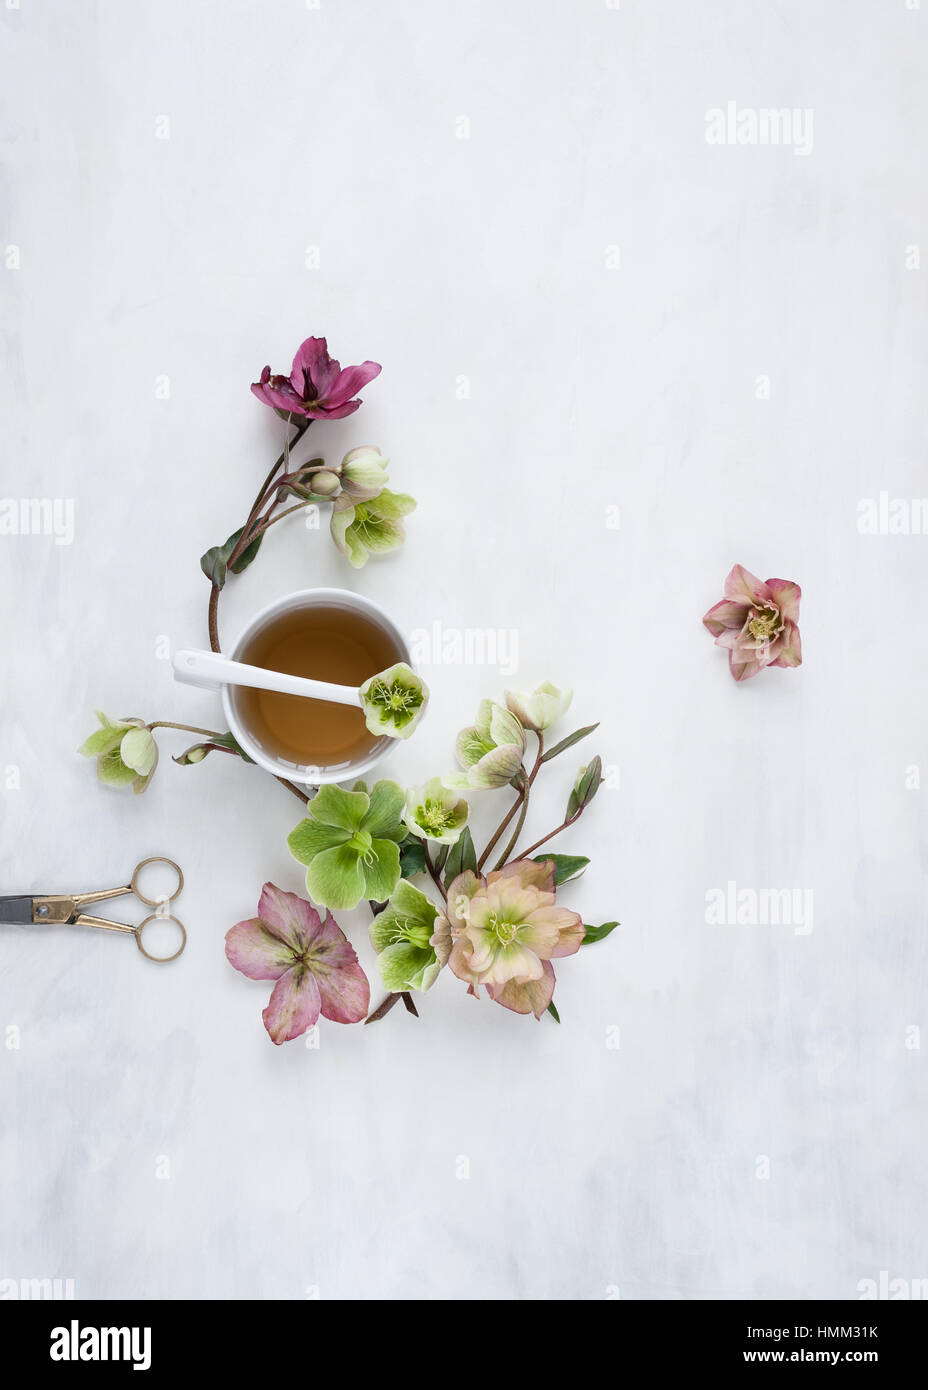 Flat lay of hellebores and teacup on a painted white and grey backdrop styled and photographed in natural light Stock Photo